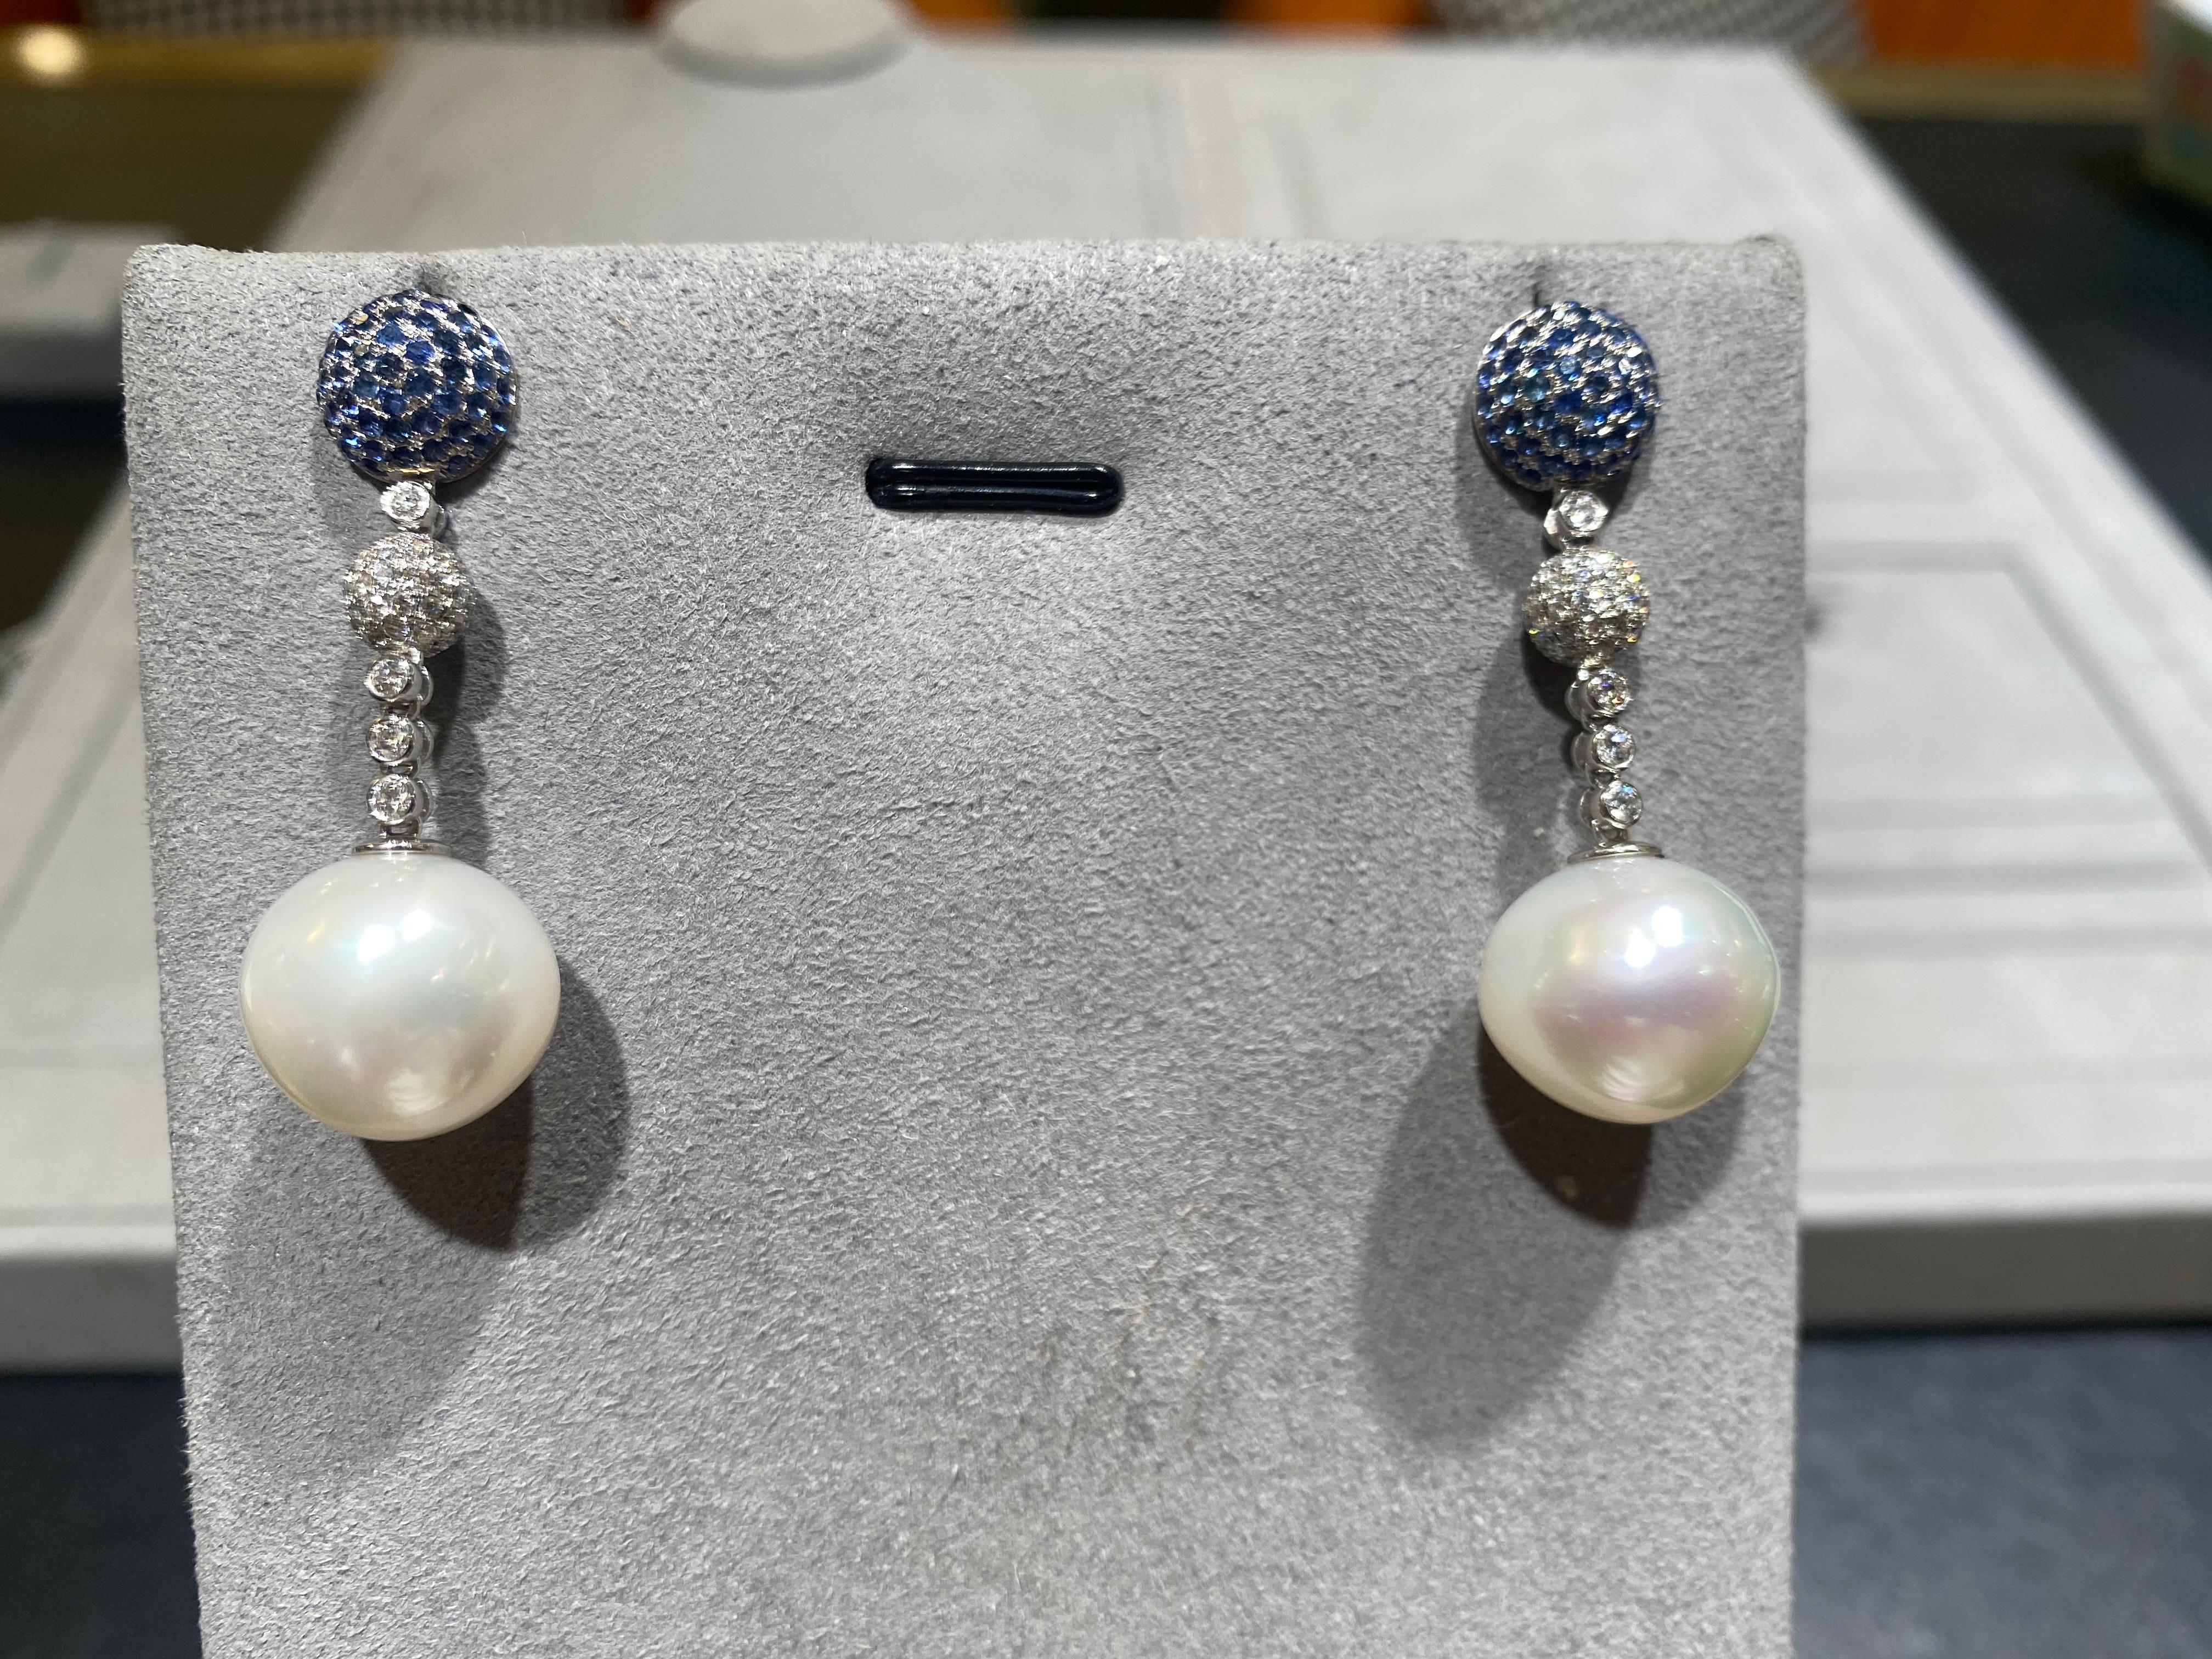 The top part of the earring is a high dome encrusted in Blue Sapphire. It is then connected by a ball full of diamond pave to the White South Sea Pearl. The Brilliant cut diamonds in between the sapphire done and South Sea Pearl add more fire and